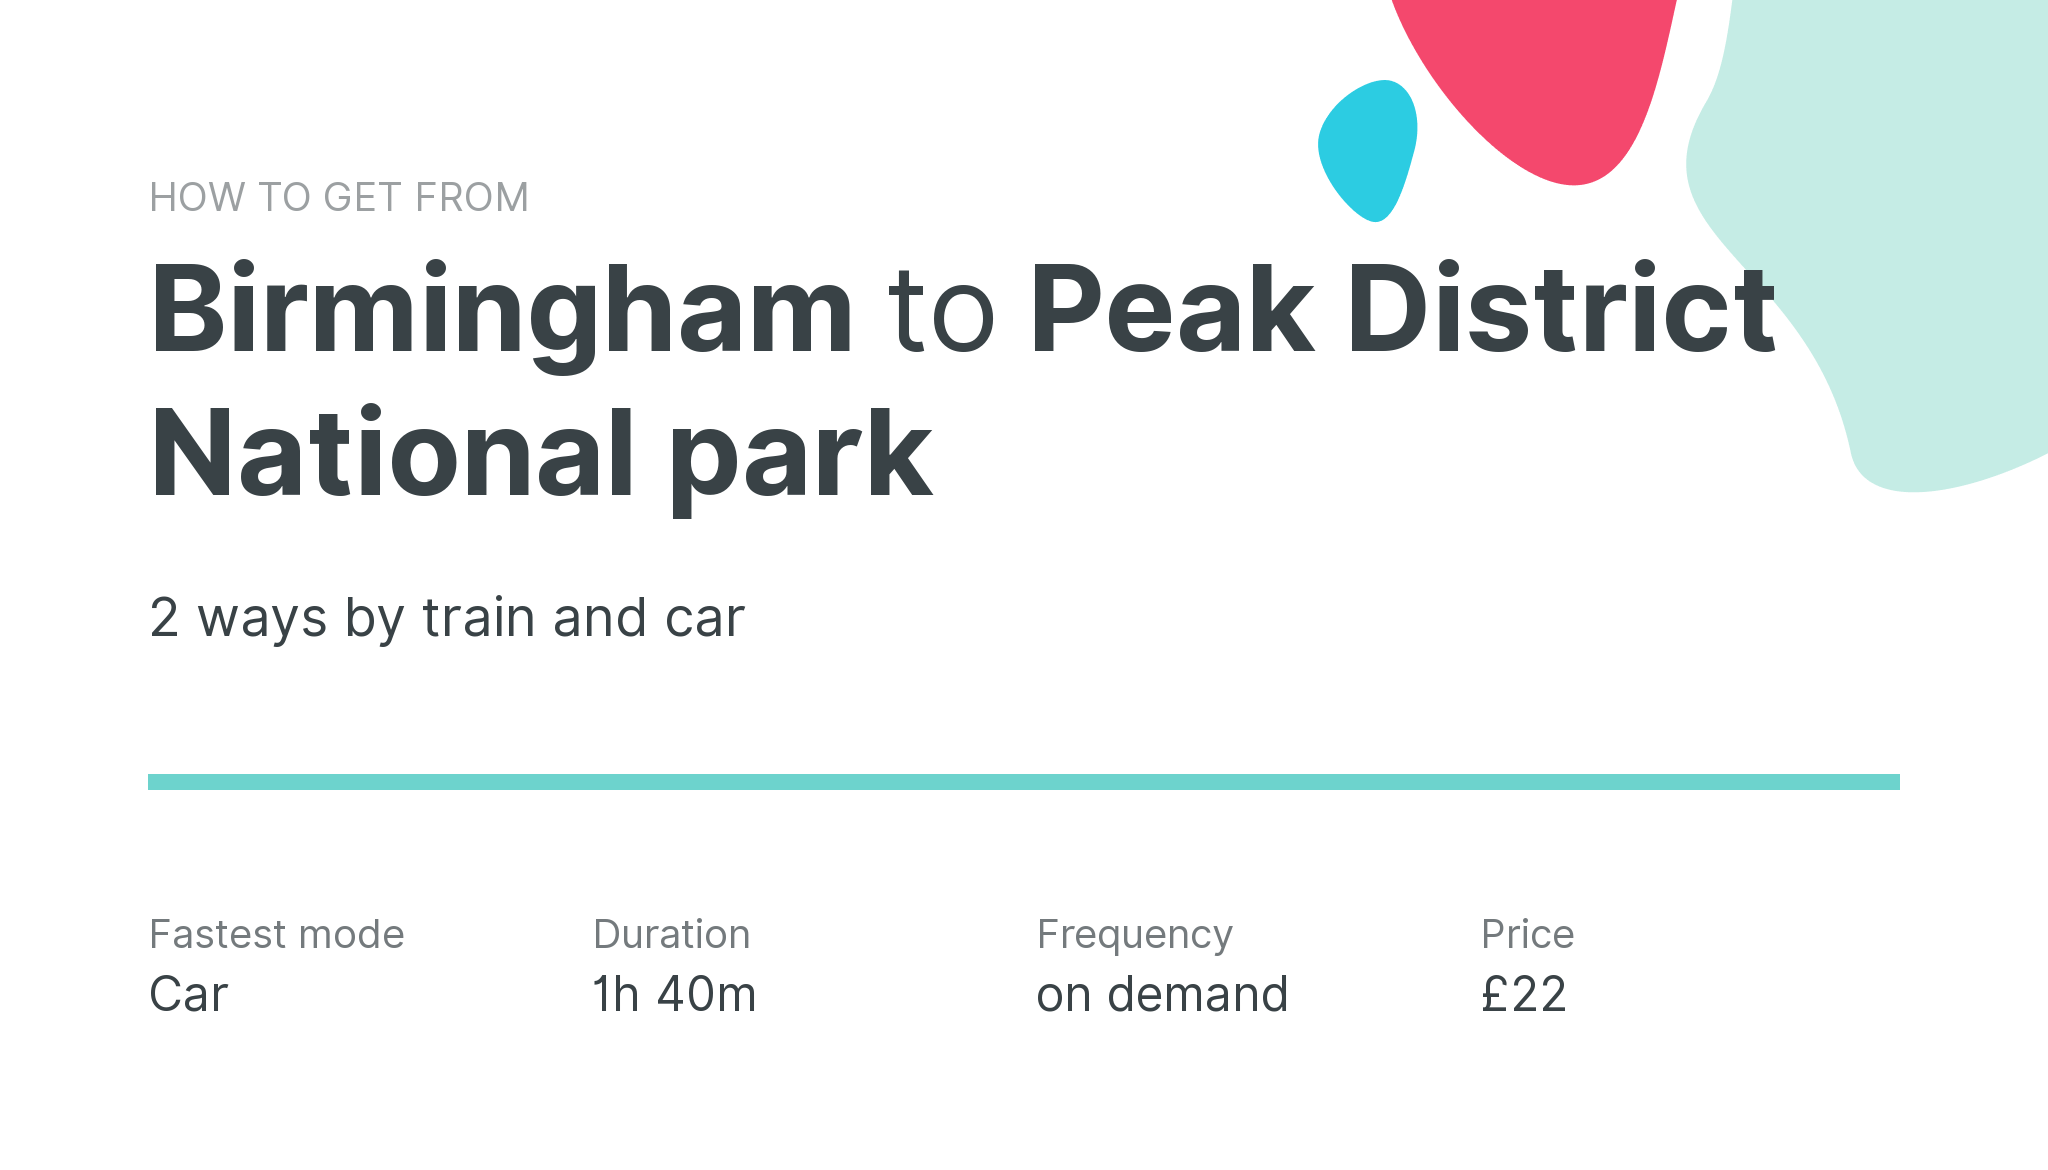 How do I get from Birmingham to Peak District National park